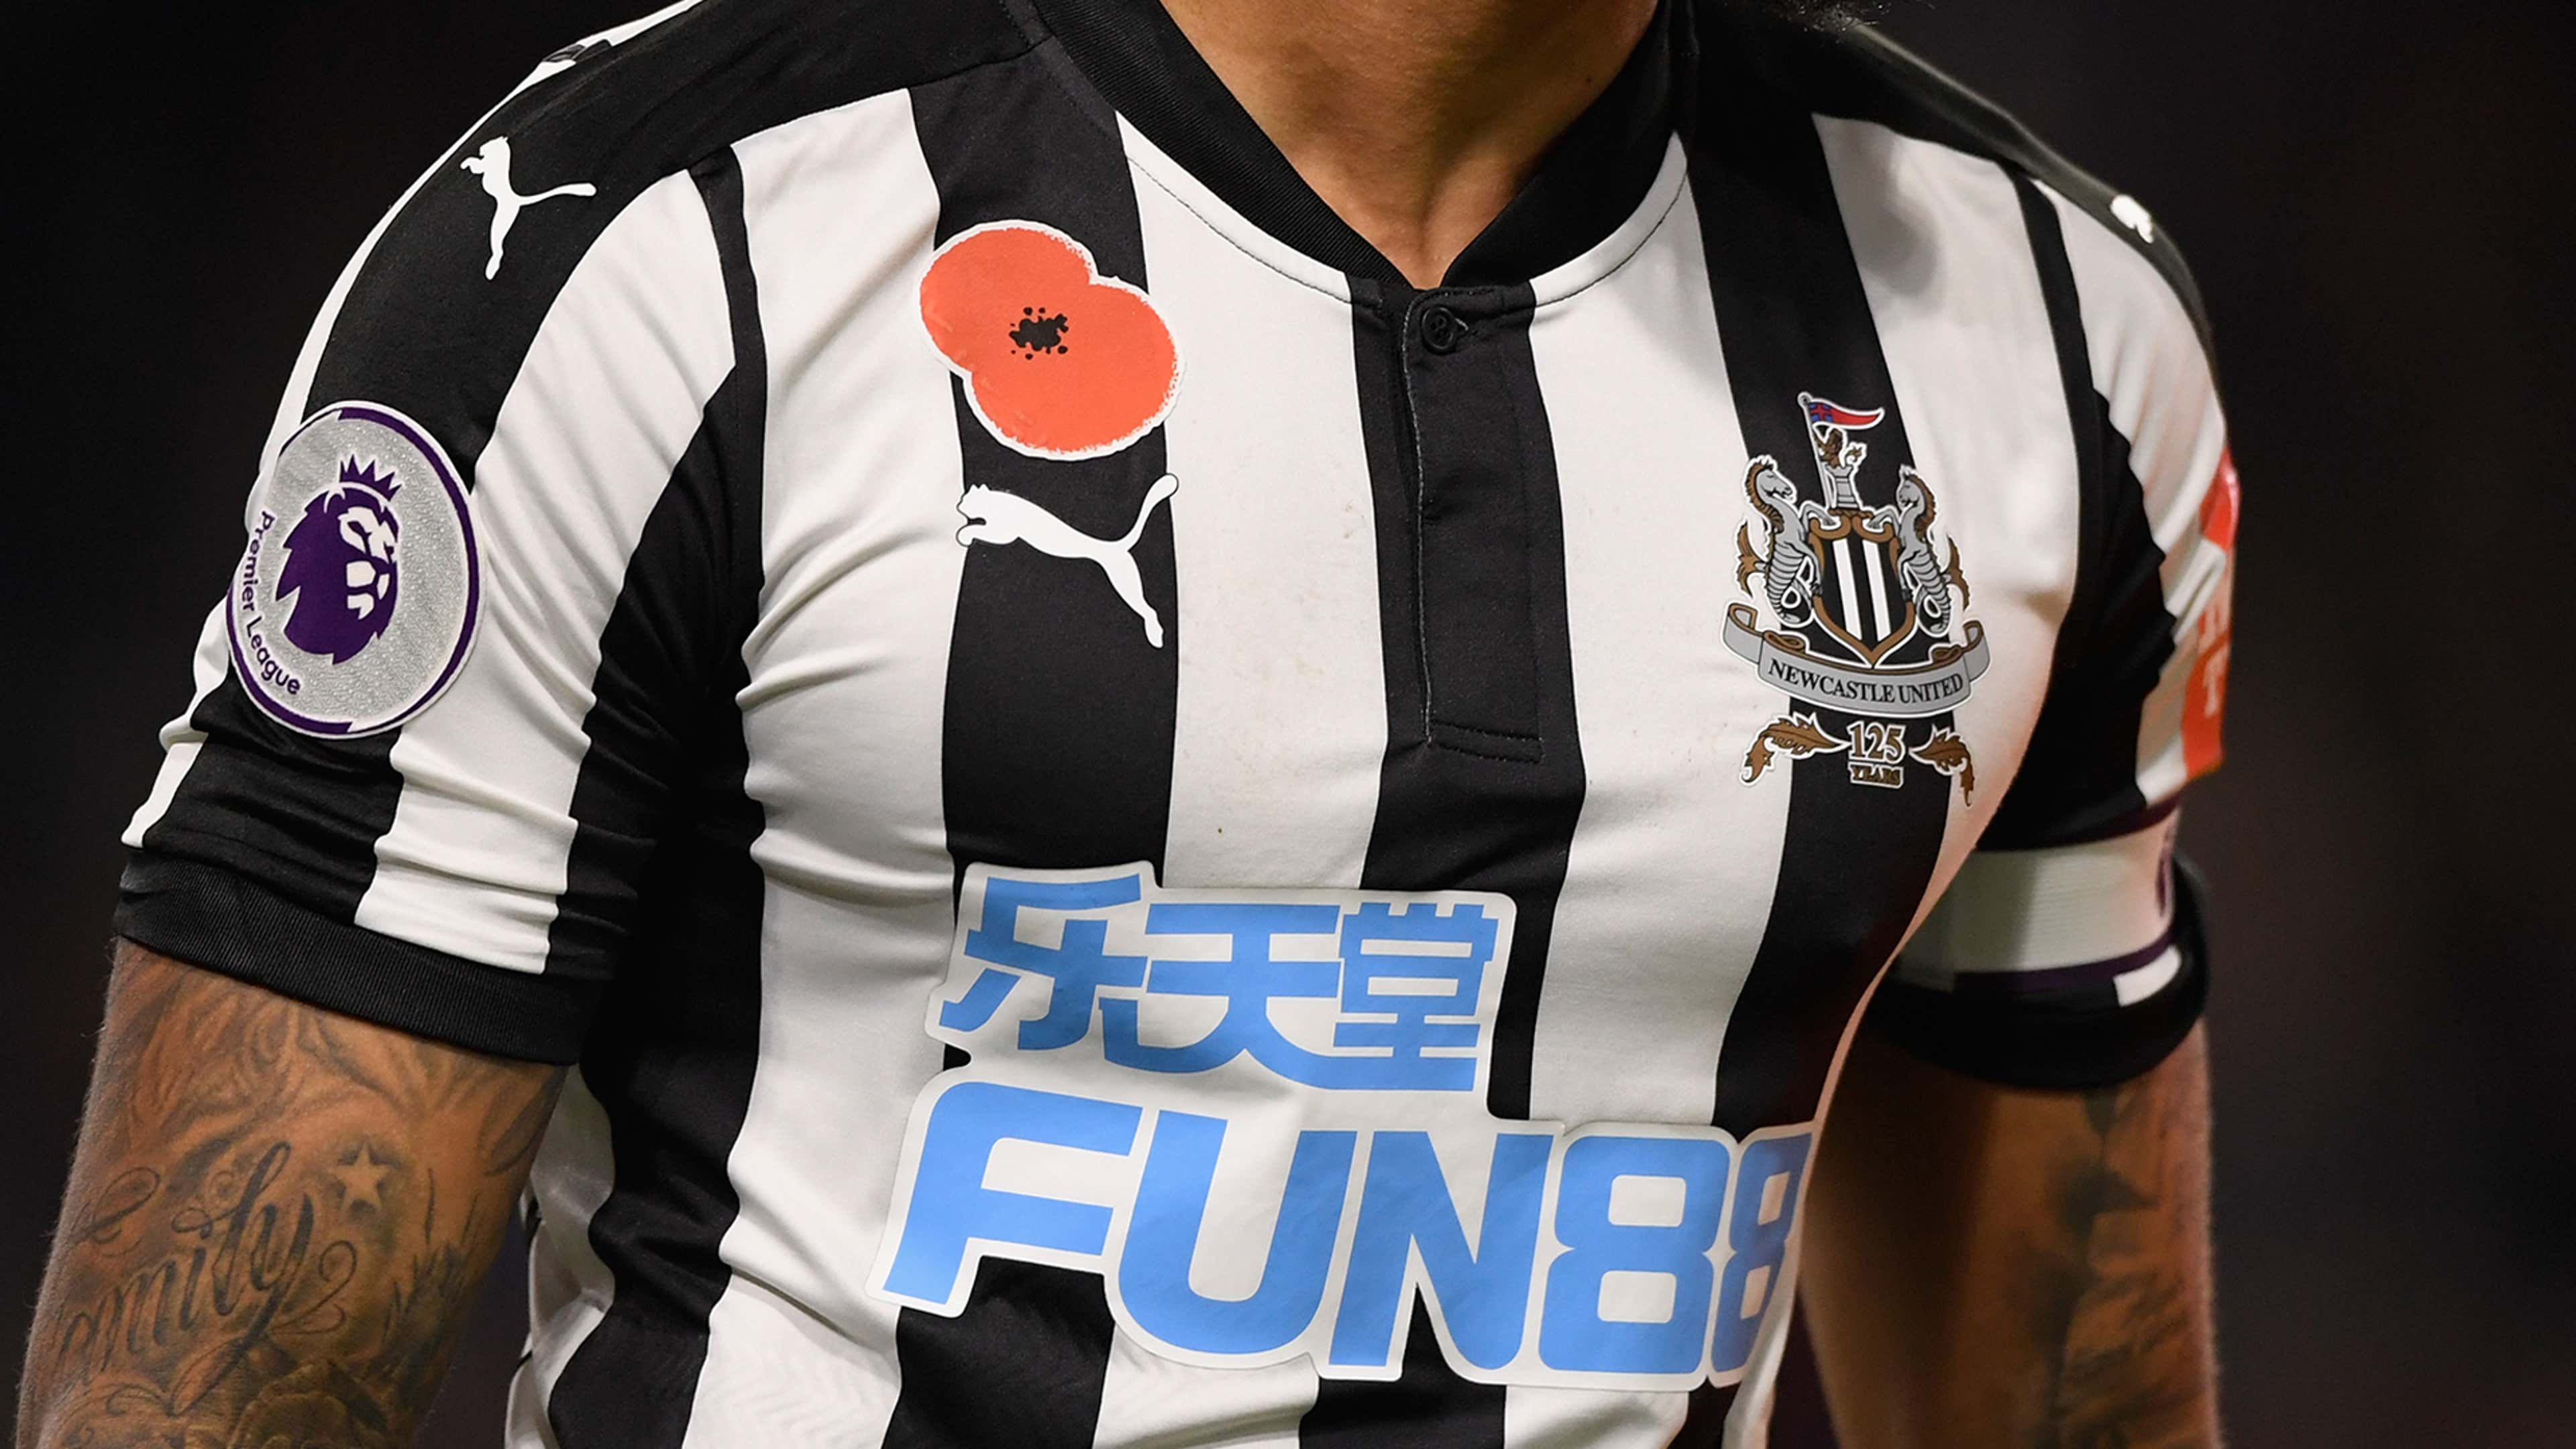 Premier League & the poppy - why do UK players, managers & presenters wear  red flower pin?